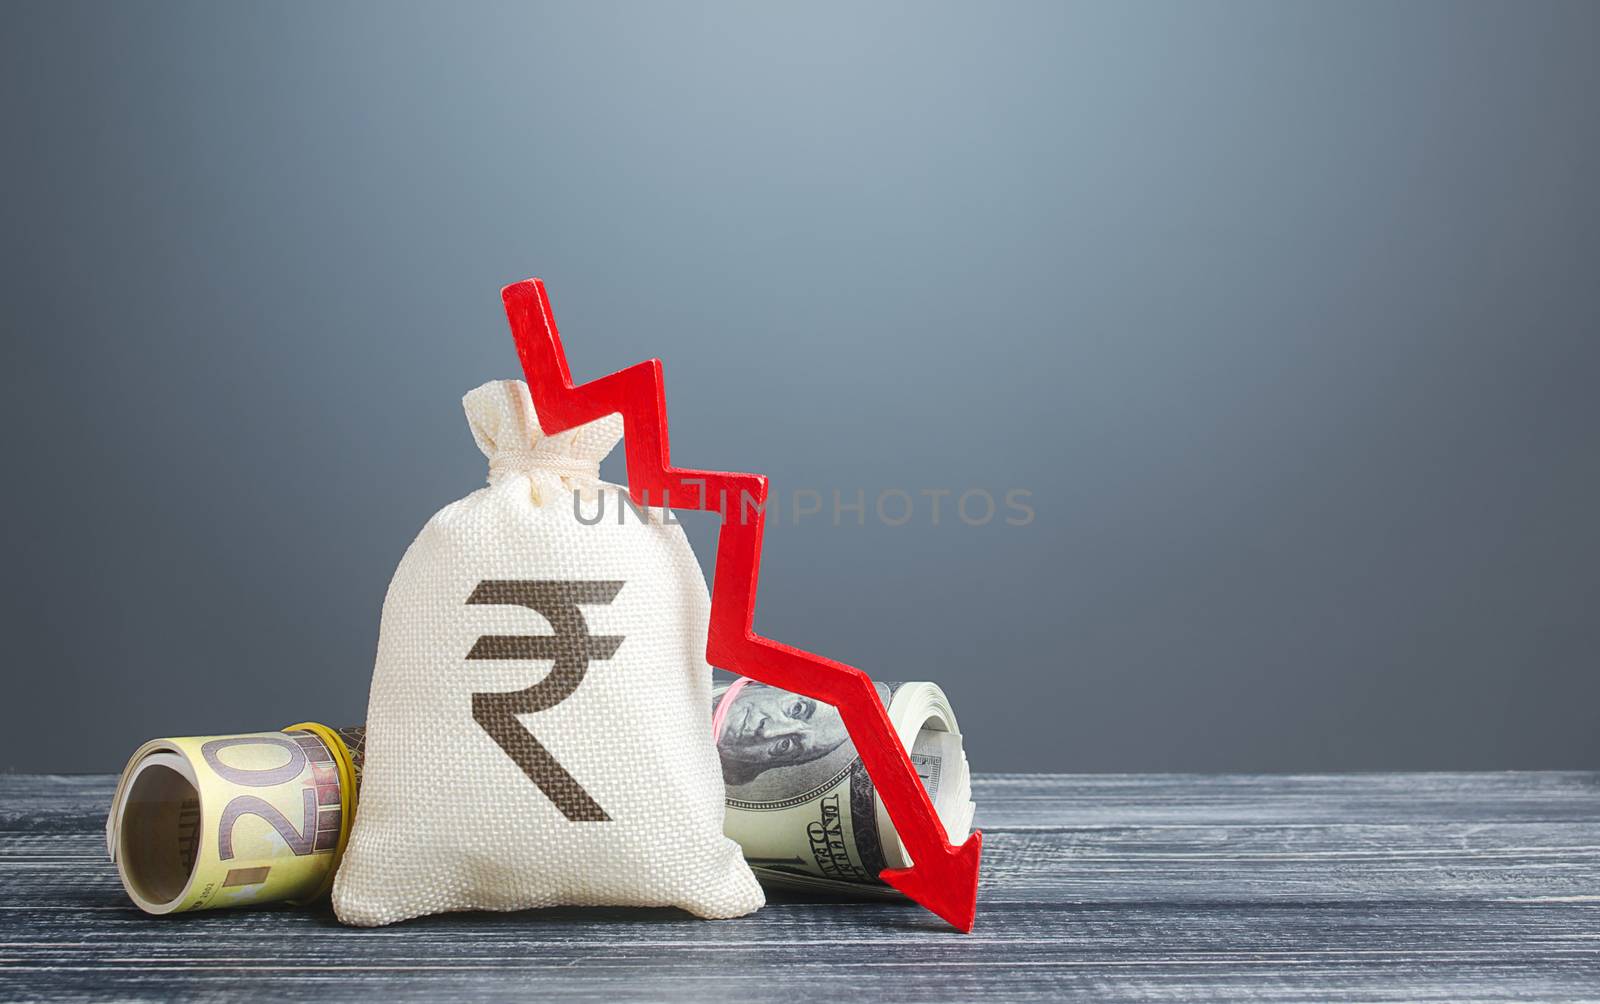 Indian rupee money bag and red arrow down. Economic difficulties. Capital flight, high risks. Costs expenses. Crisis, loss savings. Stagnation, recession, declining business activity, falling wealth.